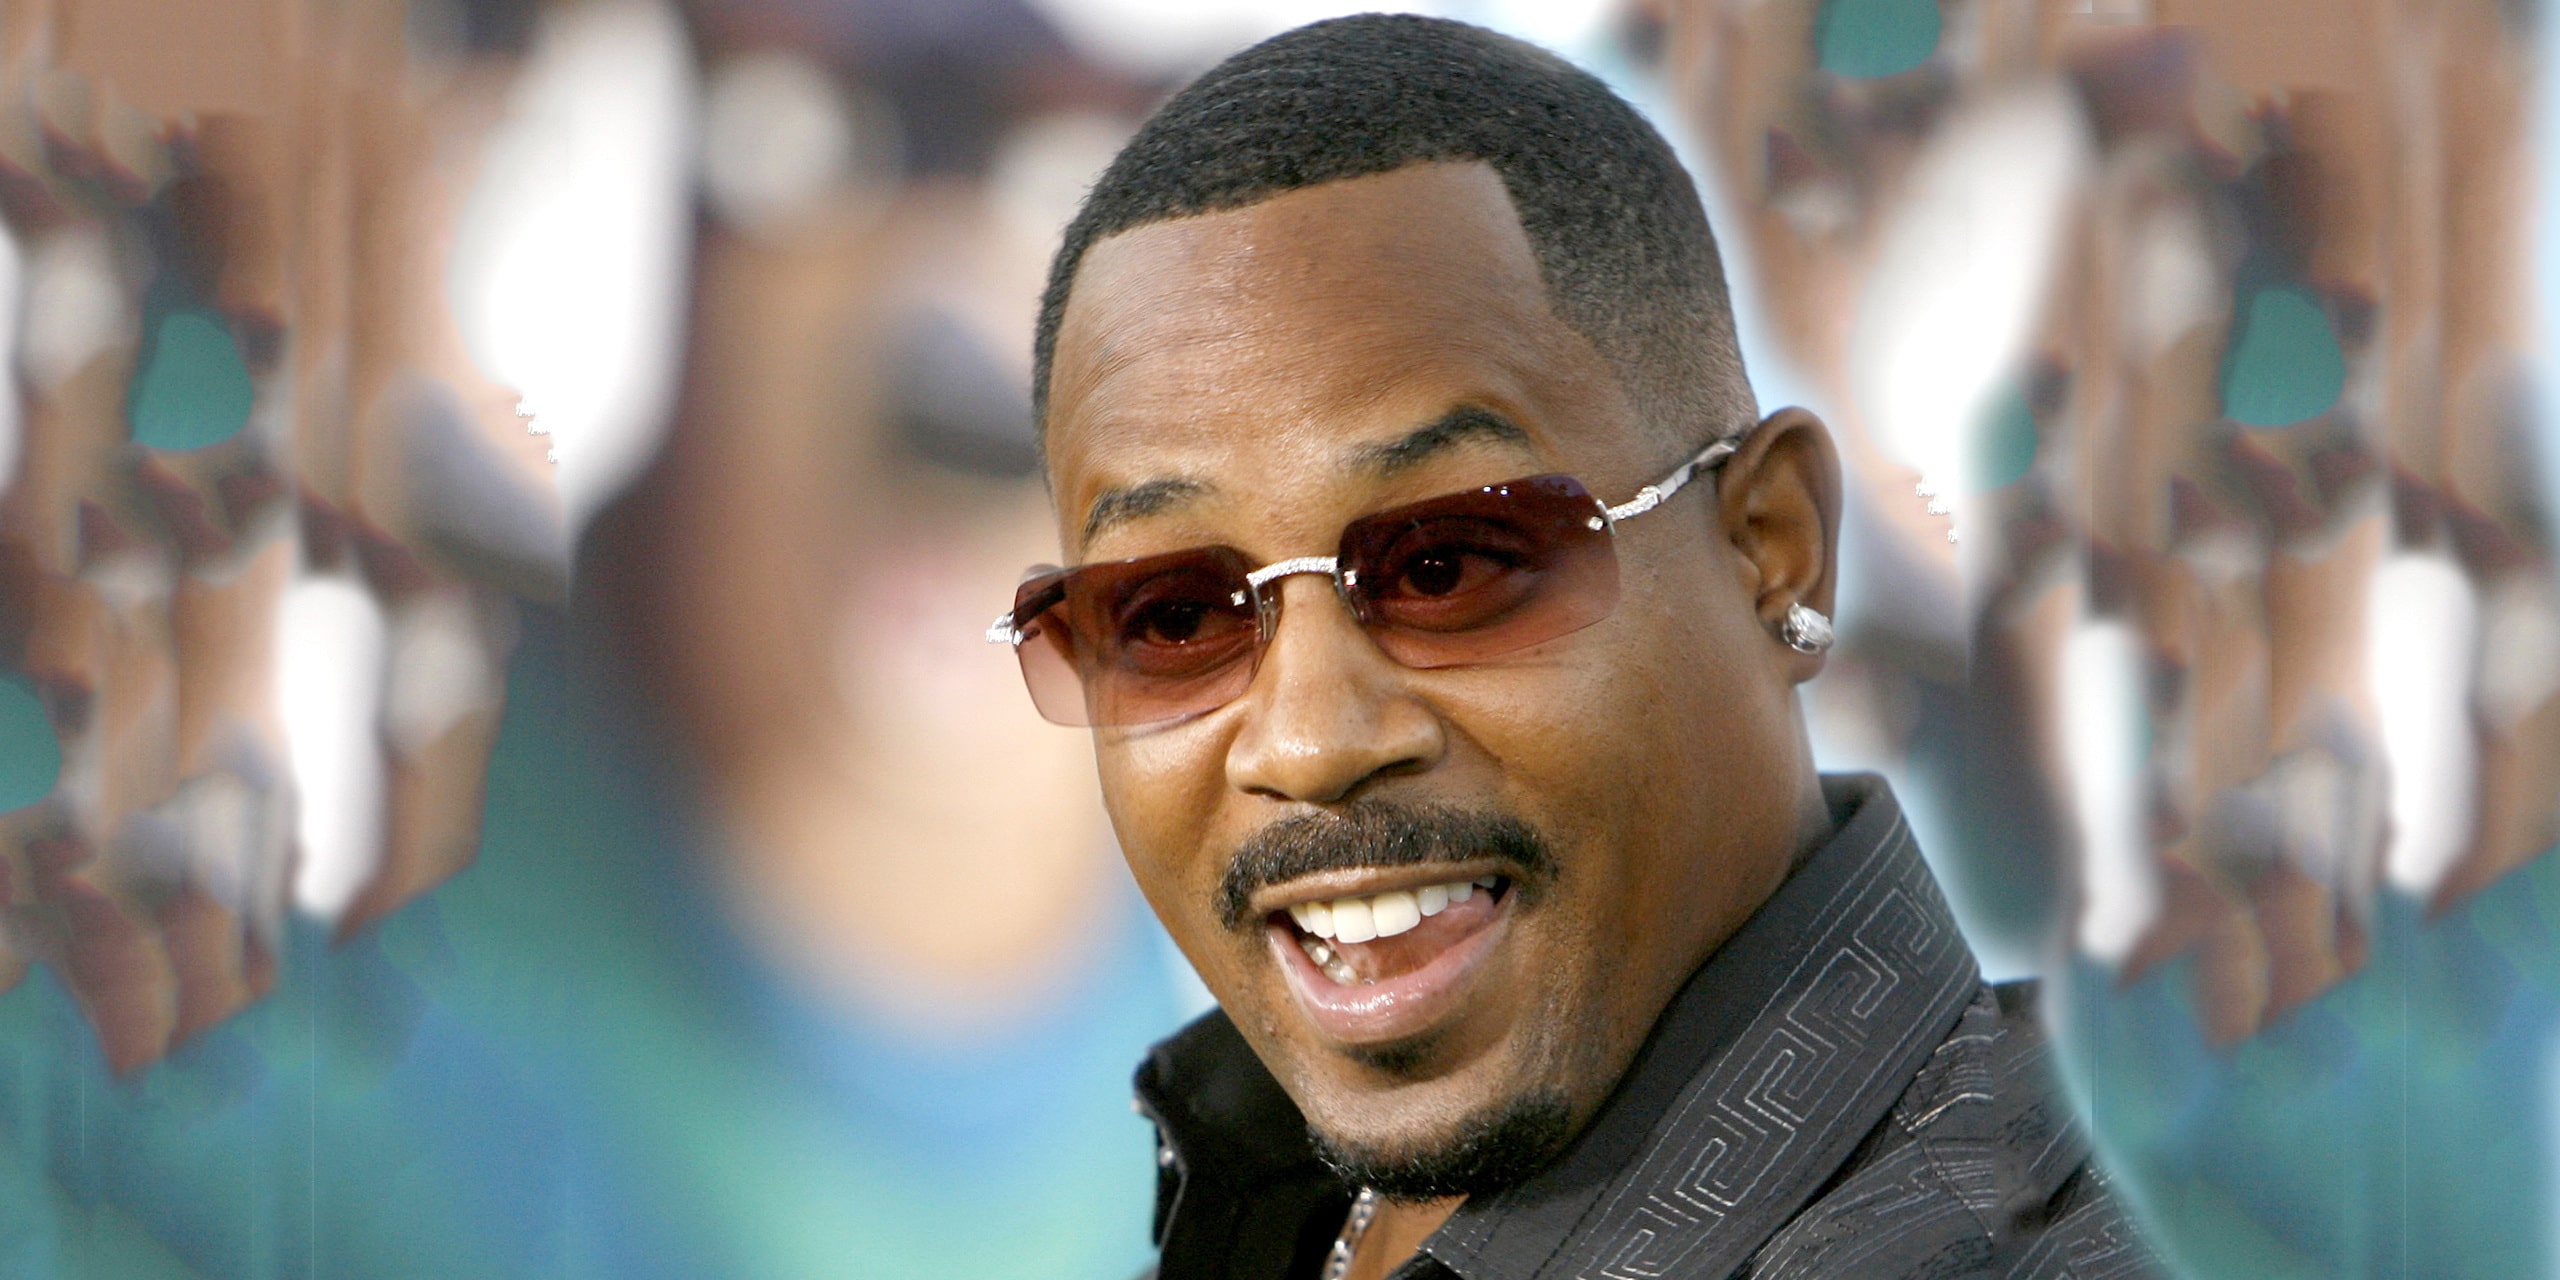 How rich is Martin Lawrence?